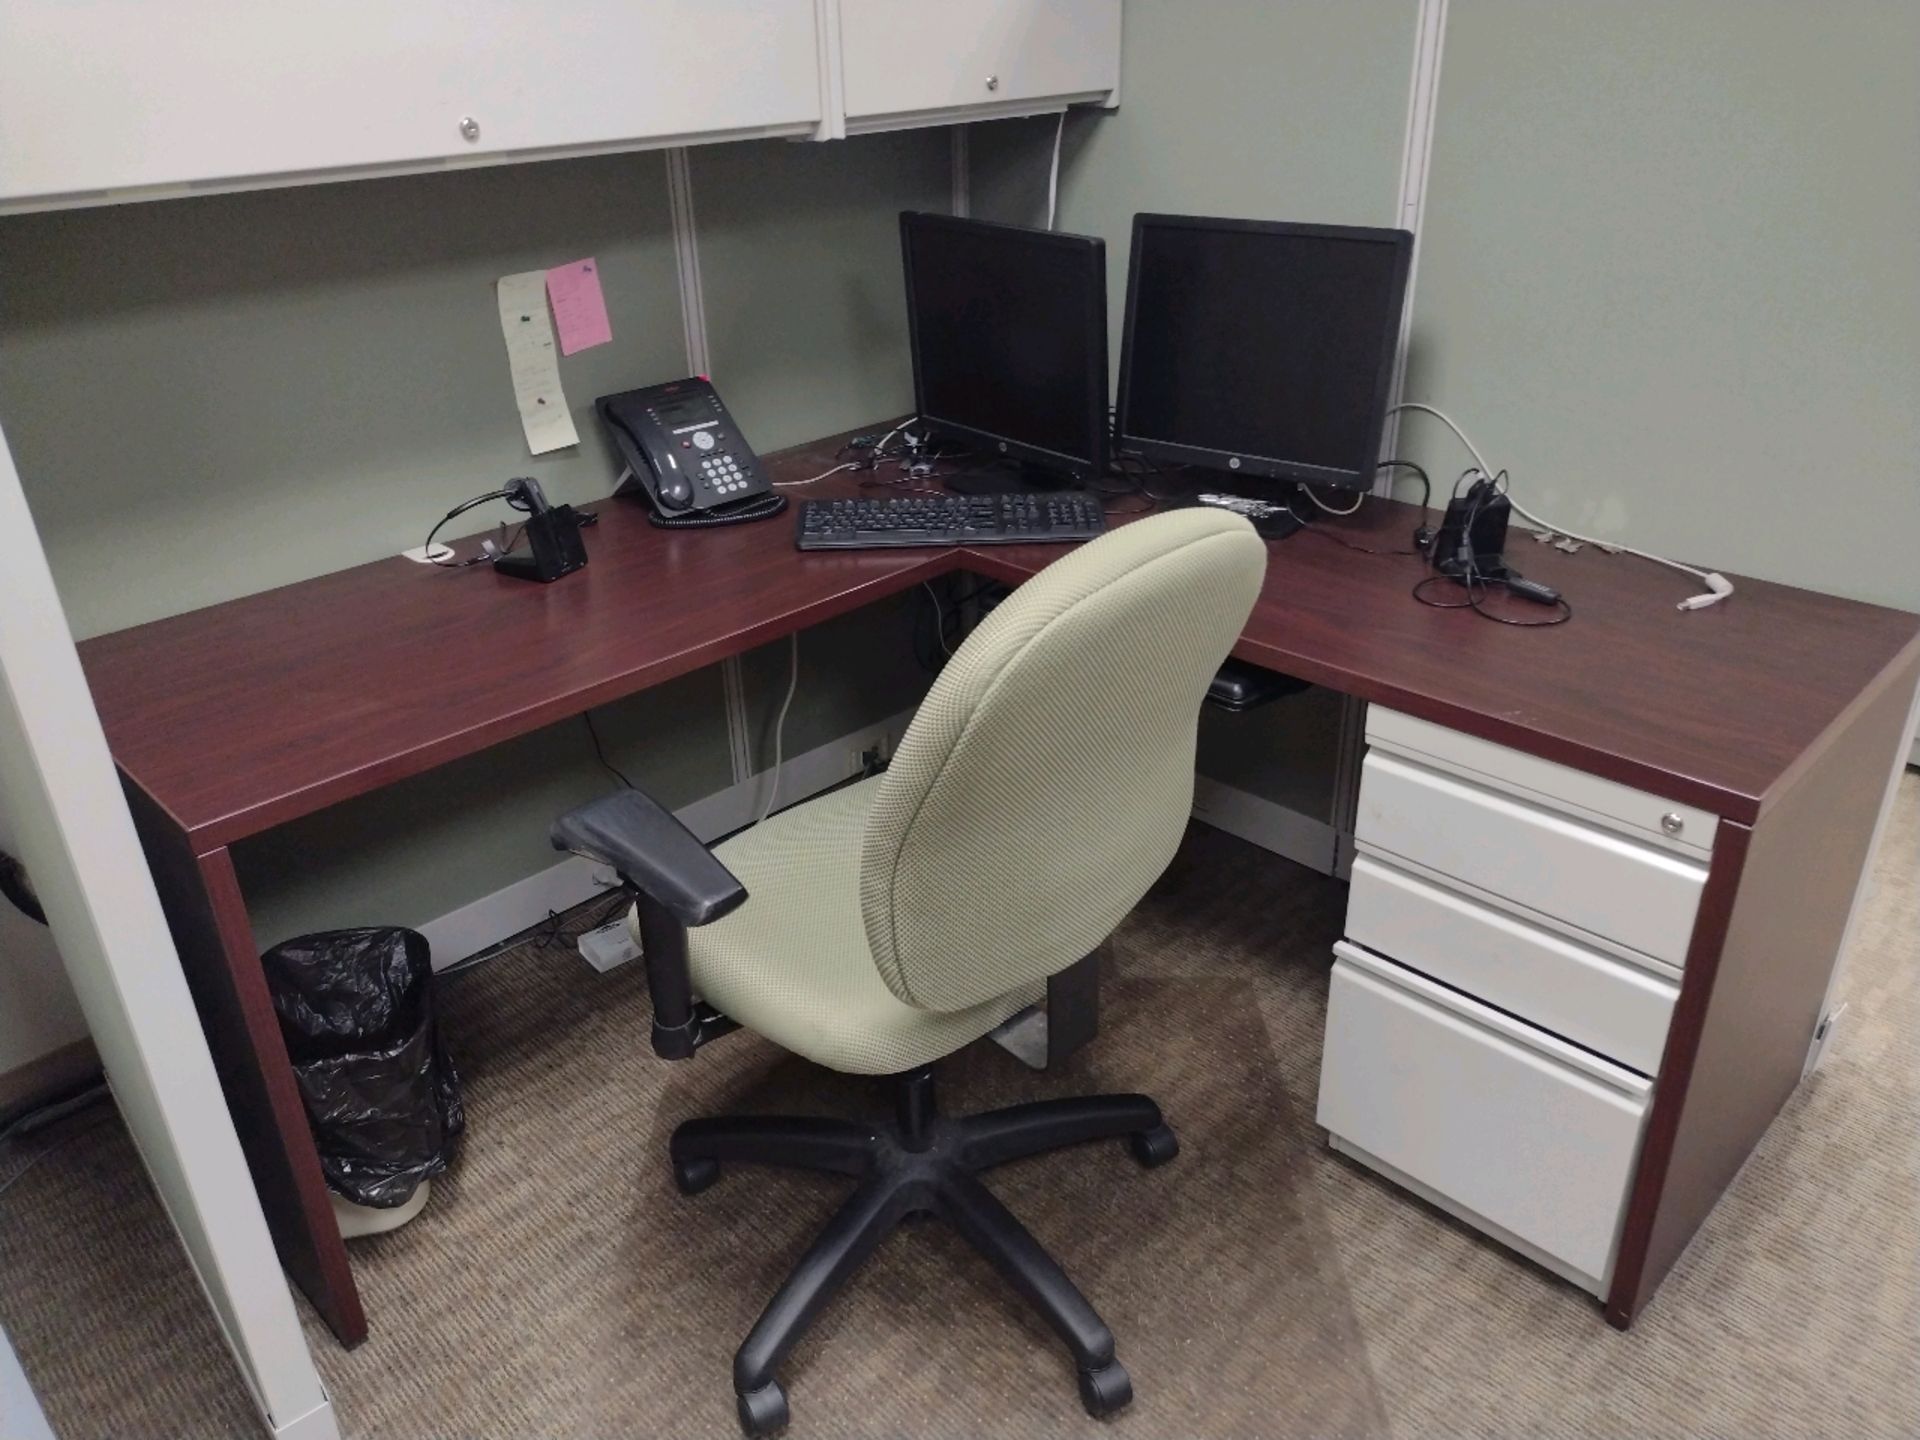 OFFICE SUITE TO INCLUDE: 8 WORK STATION MODULAR CUBICLE SYSTEM WITH CHAIRS, PRINTERS, MONITORS, - Image 8 of 16